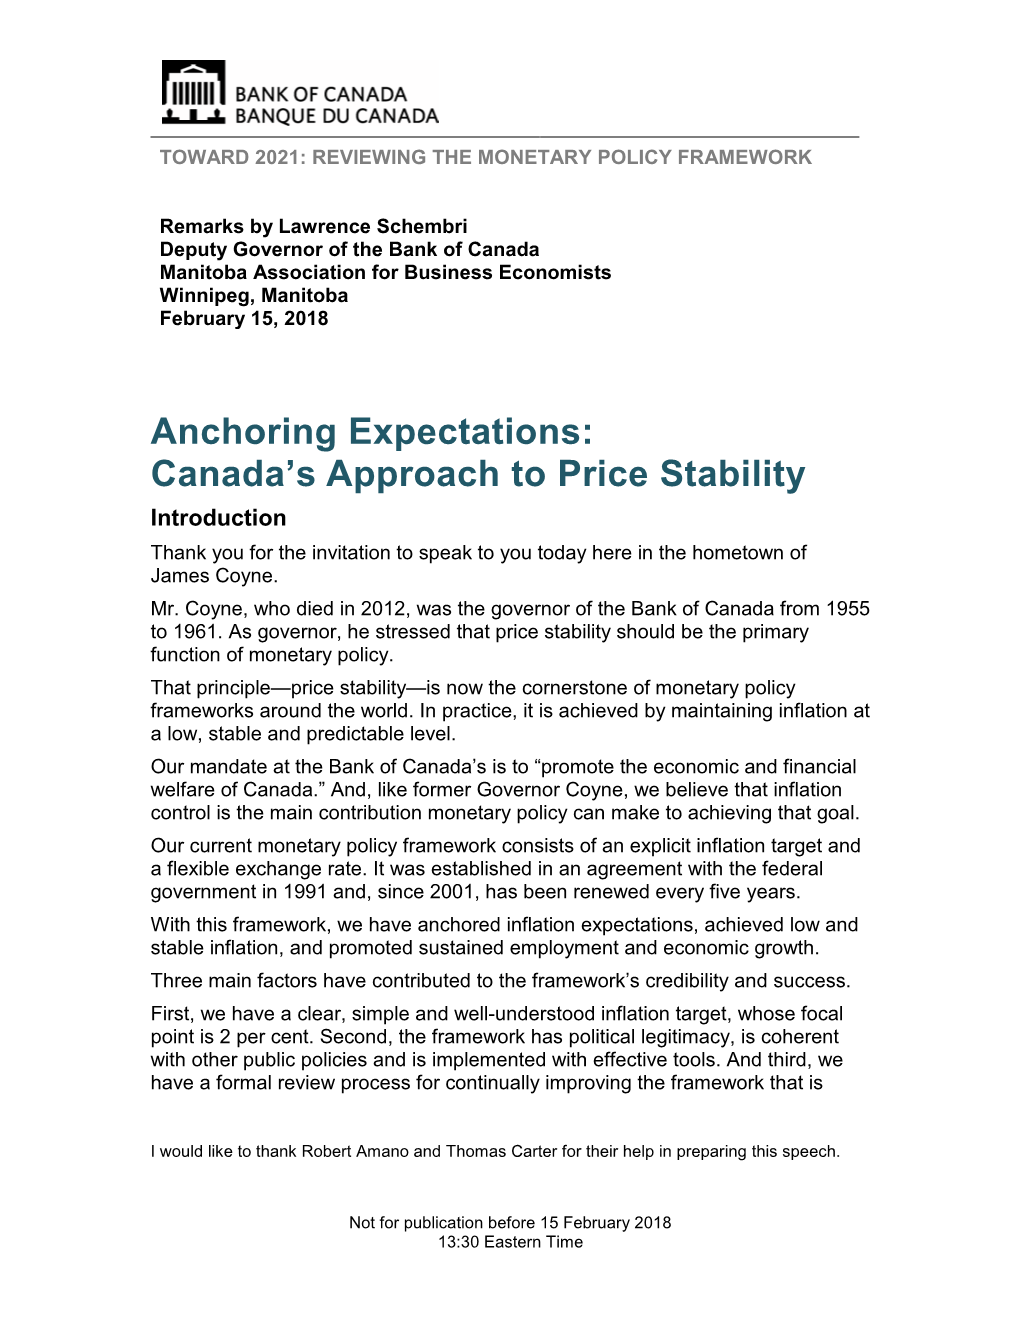 Canada's Approach to Price Stability